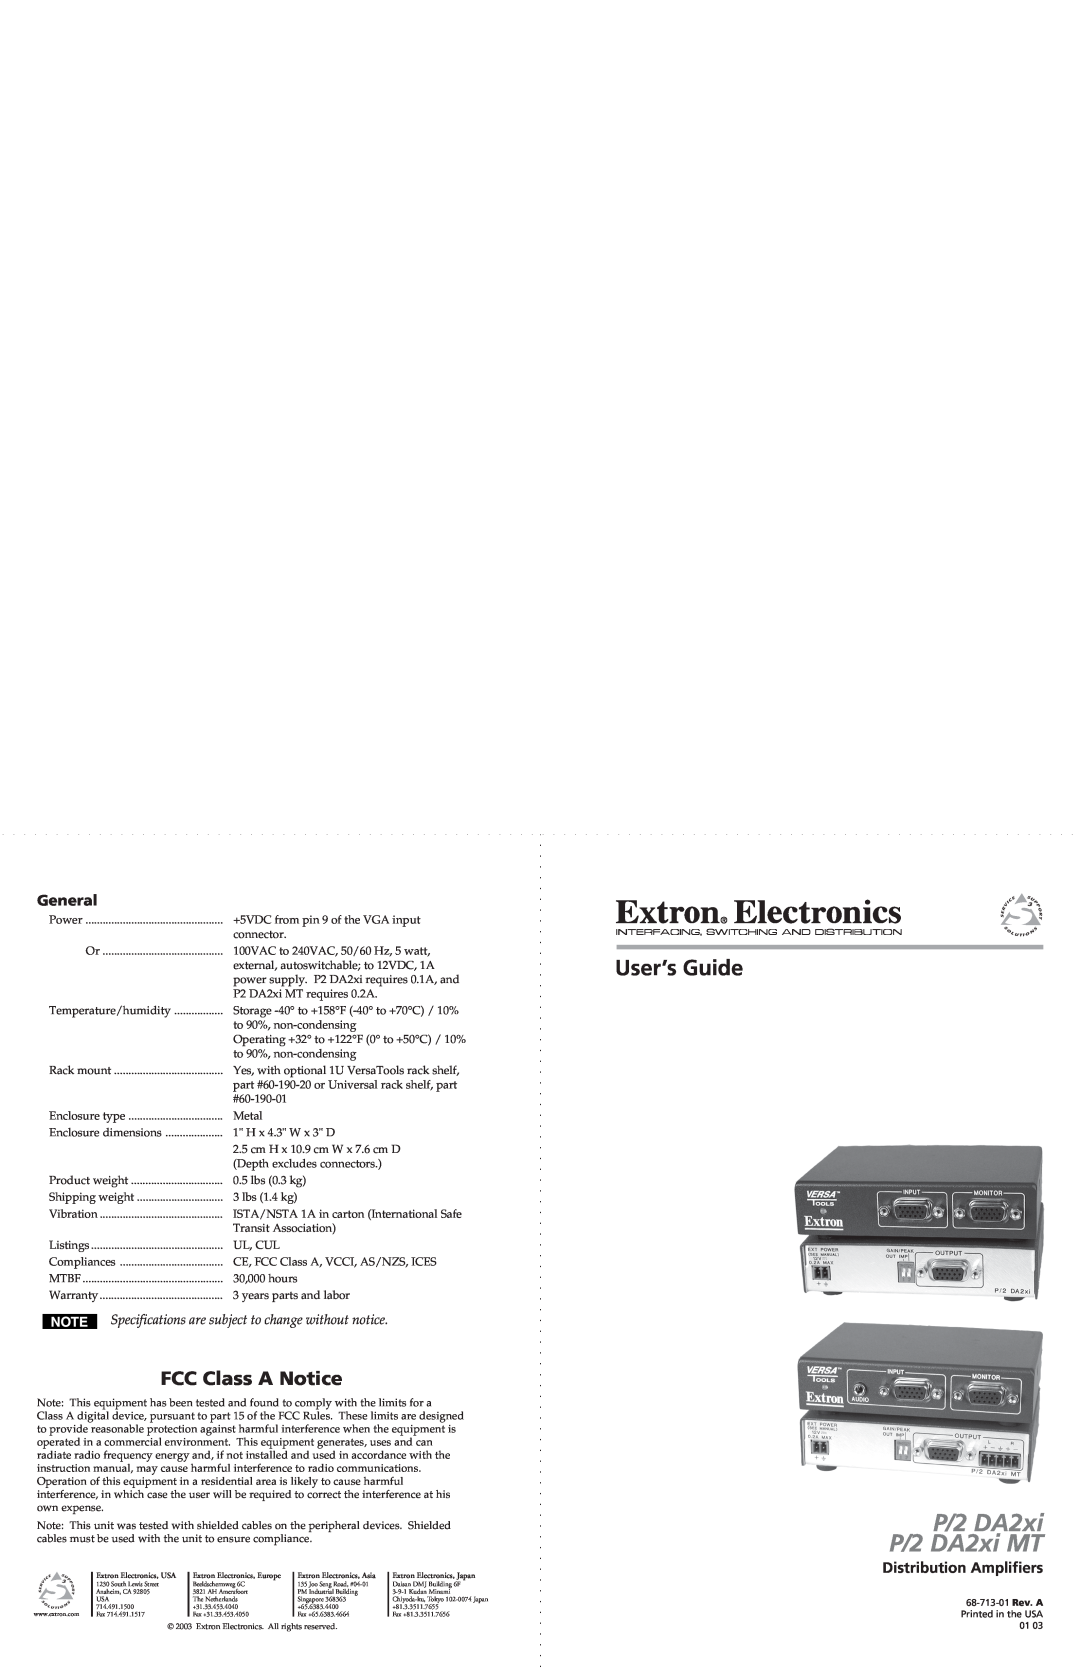 Extron electronic P/2 DA2XI MT setup guide Power down and mount, Connect inputs, Connect outputs, Installation 